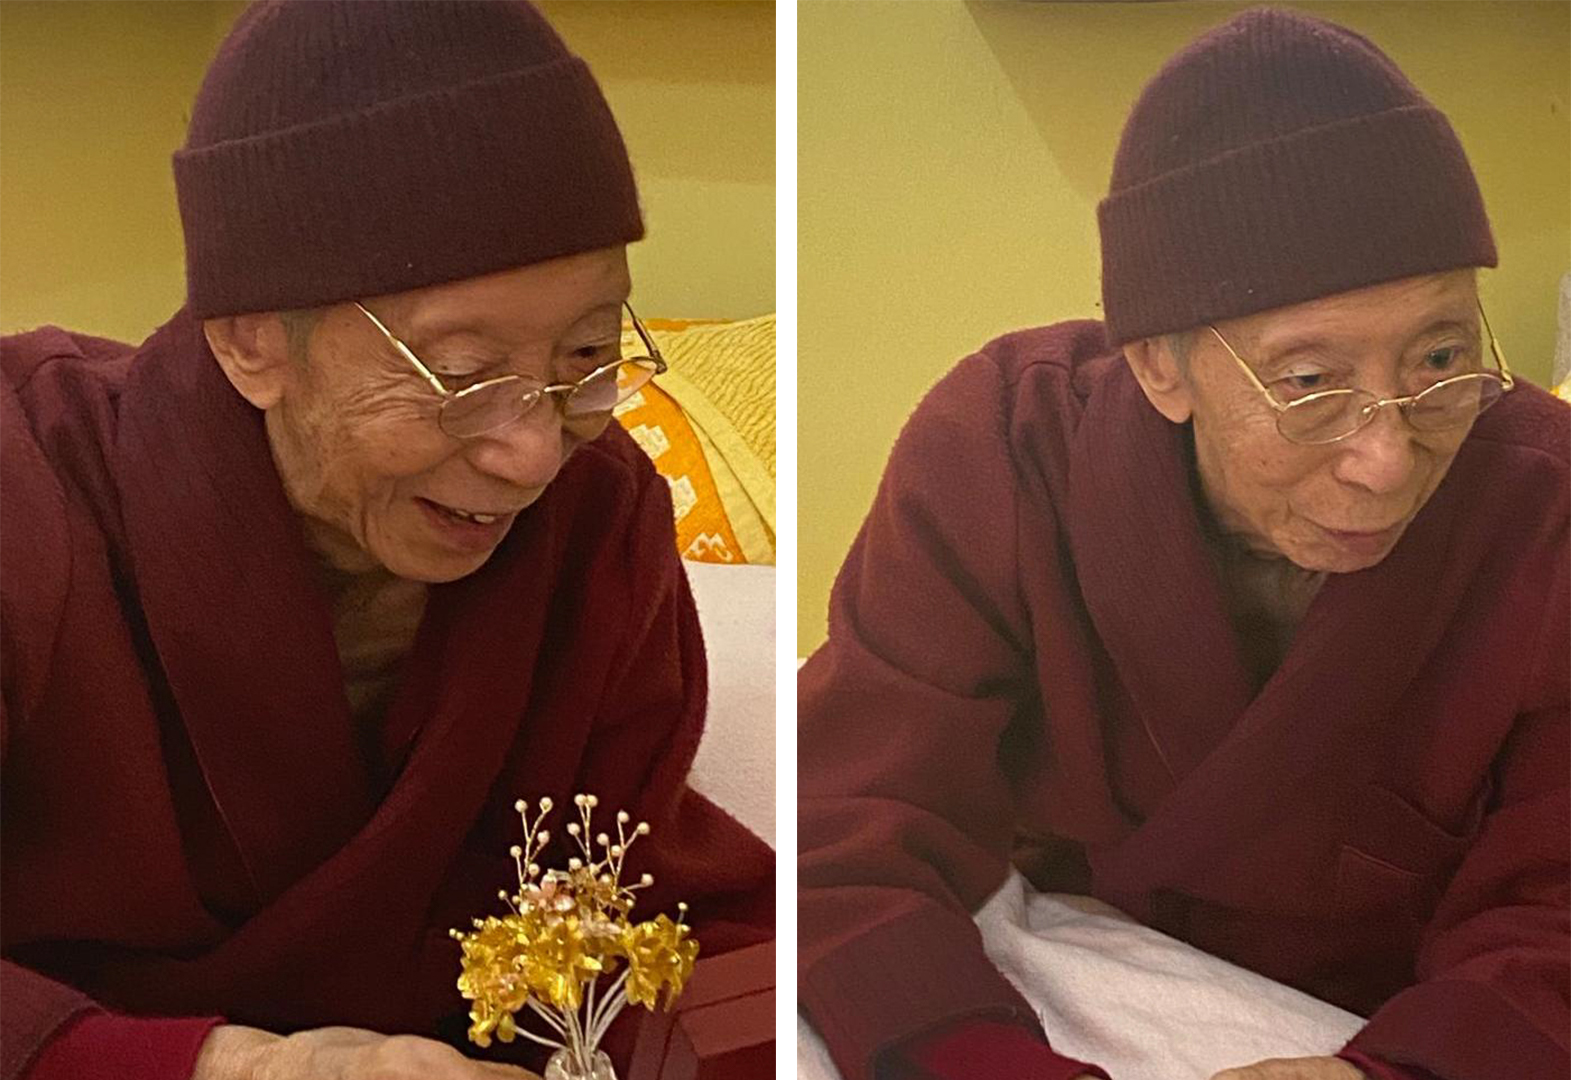 A quiet, humble monk who changed our world